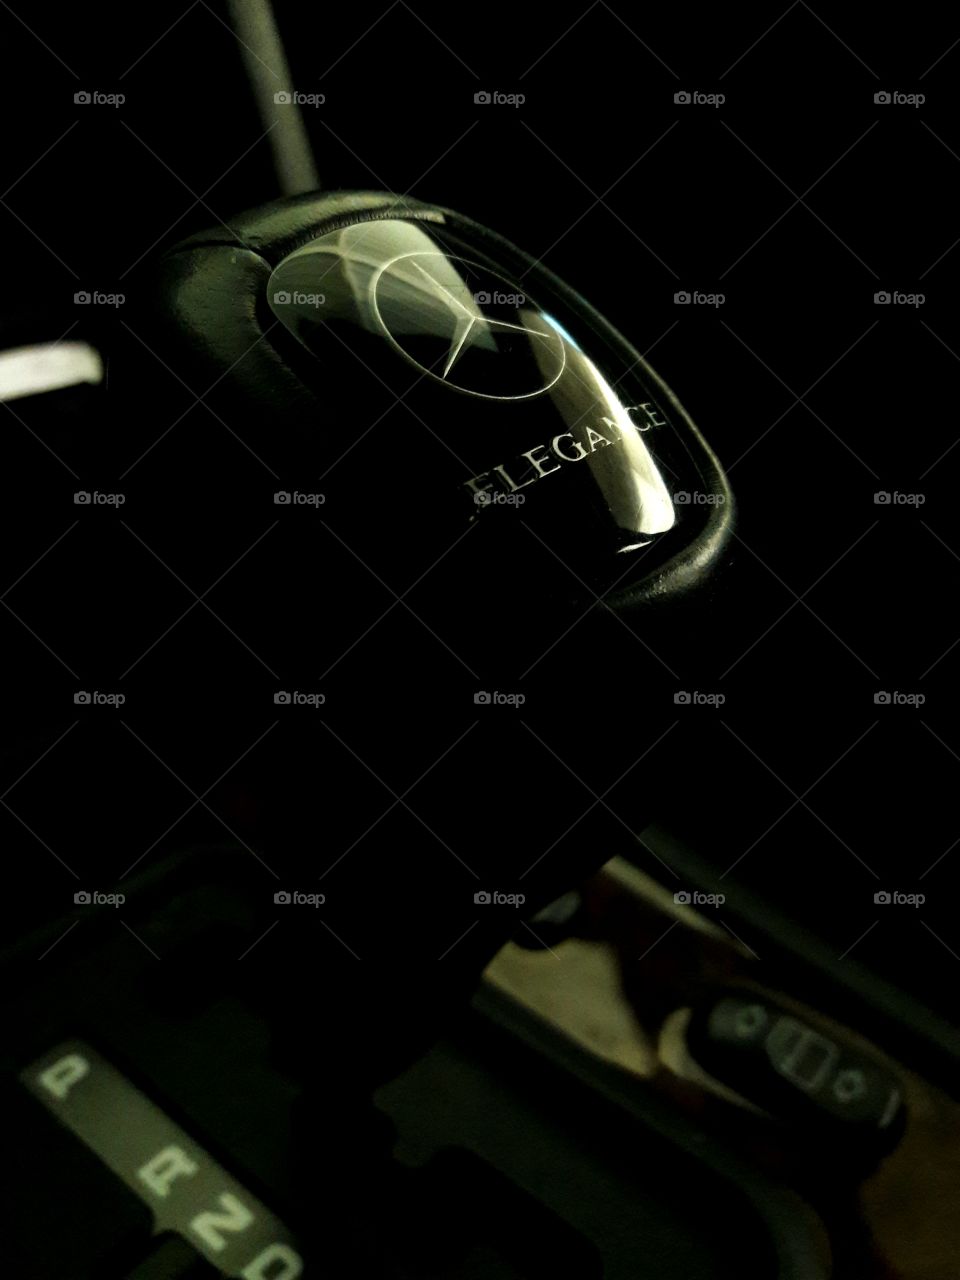 Mercedes Benz elegance shifter knob emblem logo beautiful vintage old style car nice picture dark black vehicle automobile luxury class w202 w140 w201 w124 wood panel automatic shifter lever close up